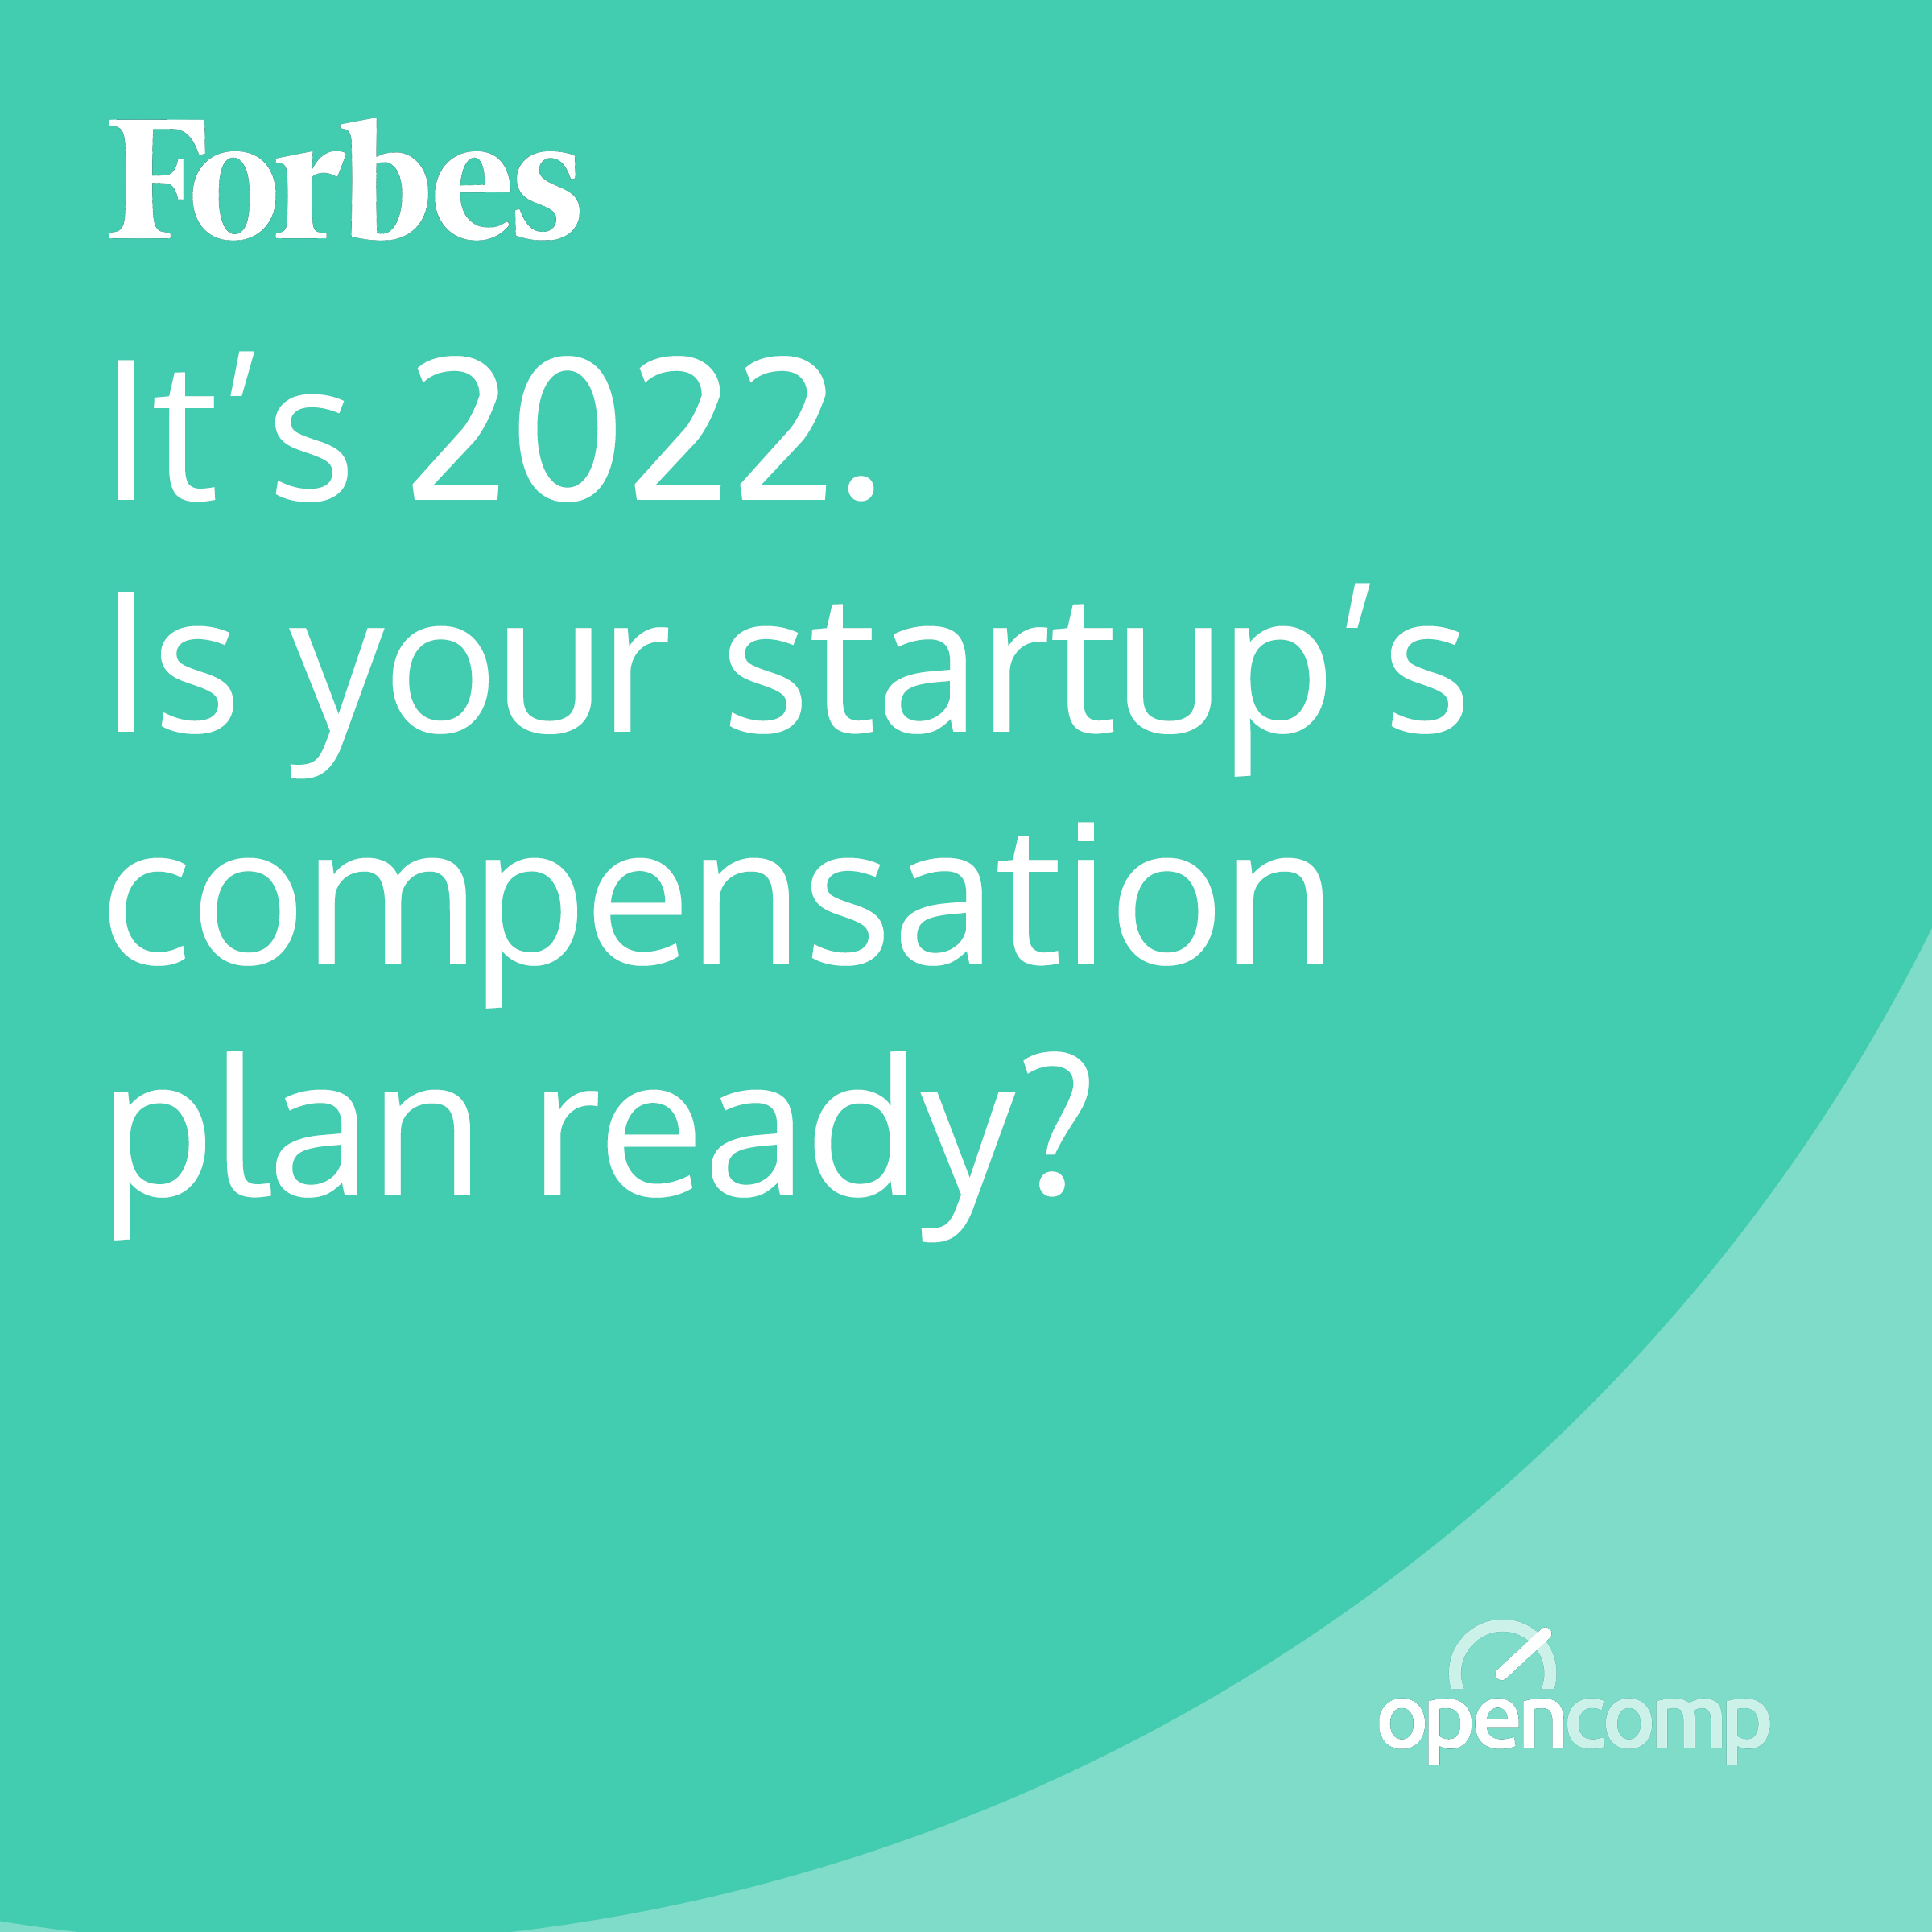 Forbes: It’s 2022. Is Your Startup’s Compensation Plan Ready?